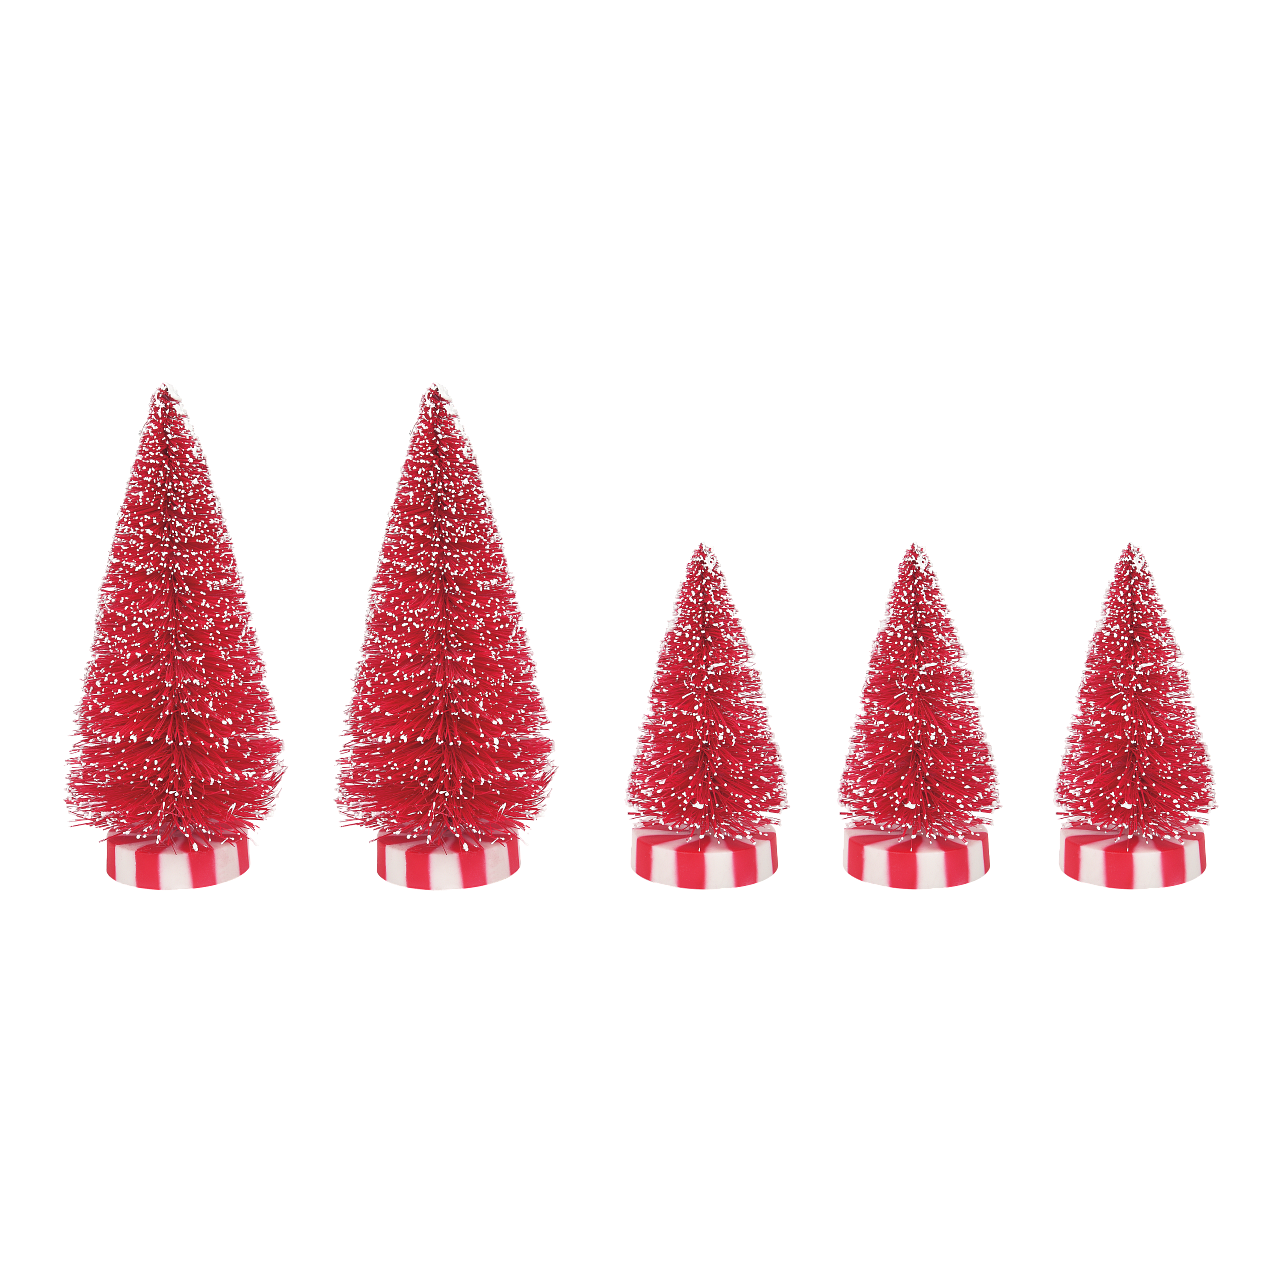 Candy Cane Striped Red White Skinny Bottle Brush Christmas Trees Set of 3